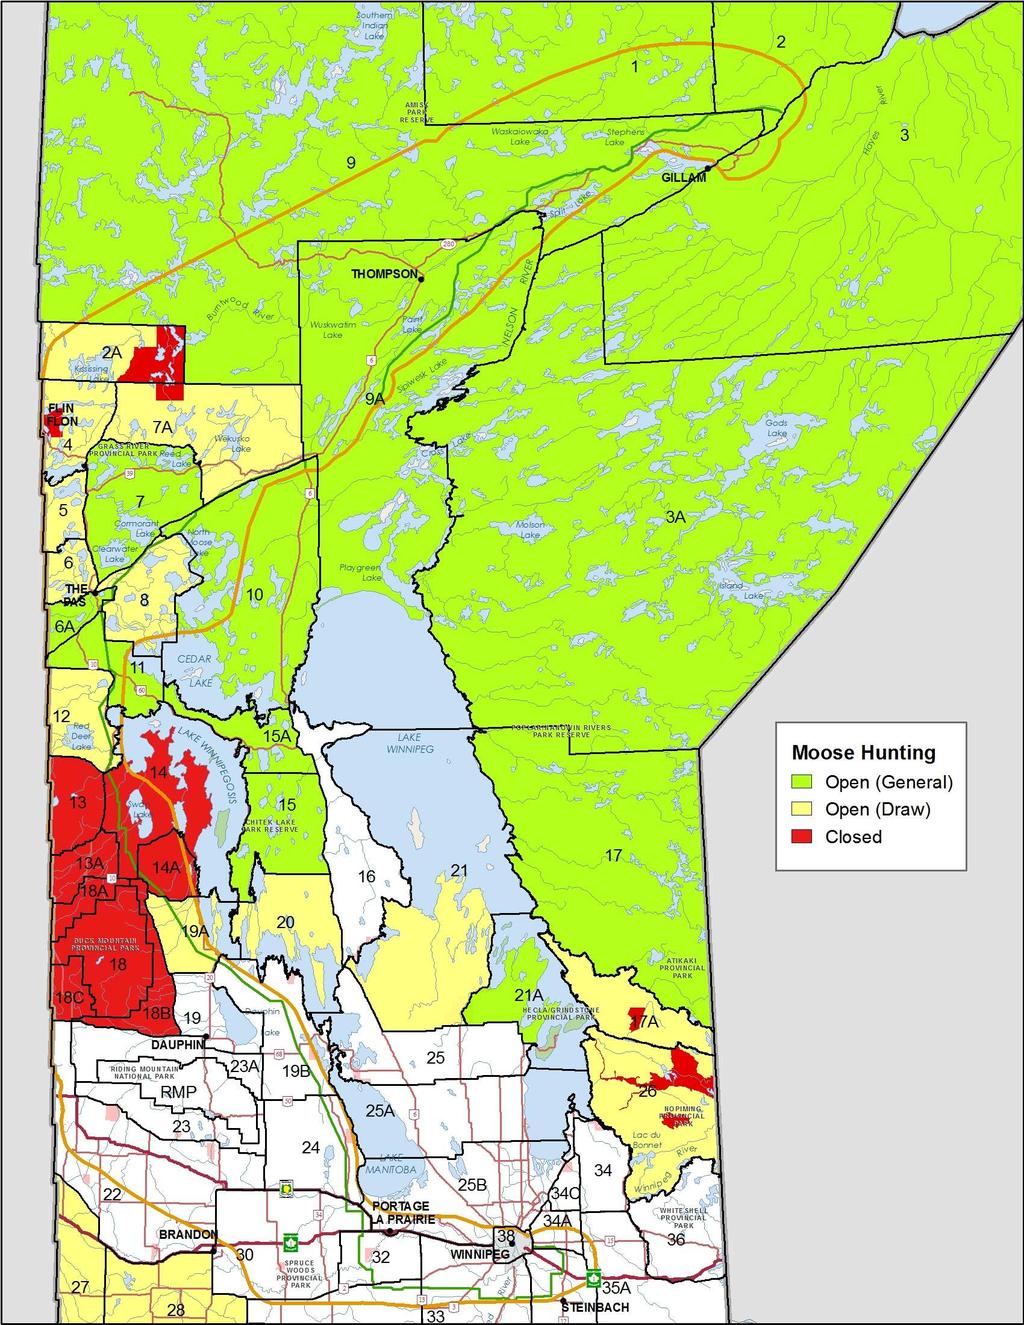 MCWS Moose Management Conduct moose surveys periodically Consultation with Rights-Based Communities on moose hunting closures GHAs 13, 13A, 14, 14A, 18, 18A, 18B and 18C have been temporarily closed